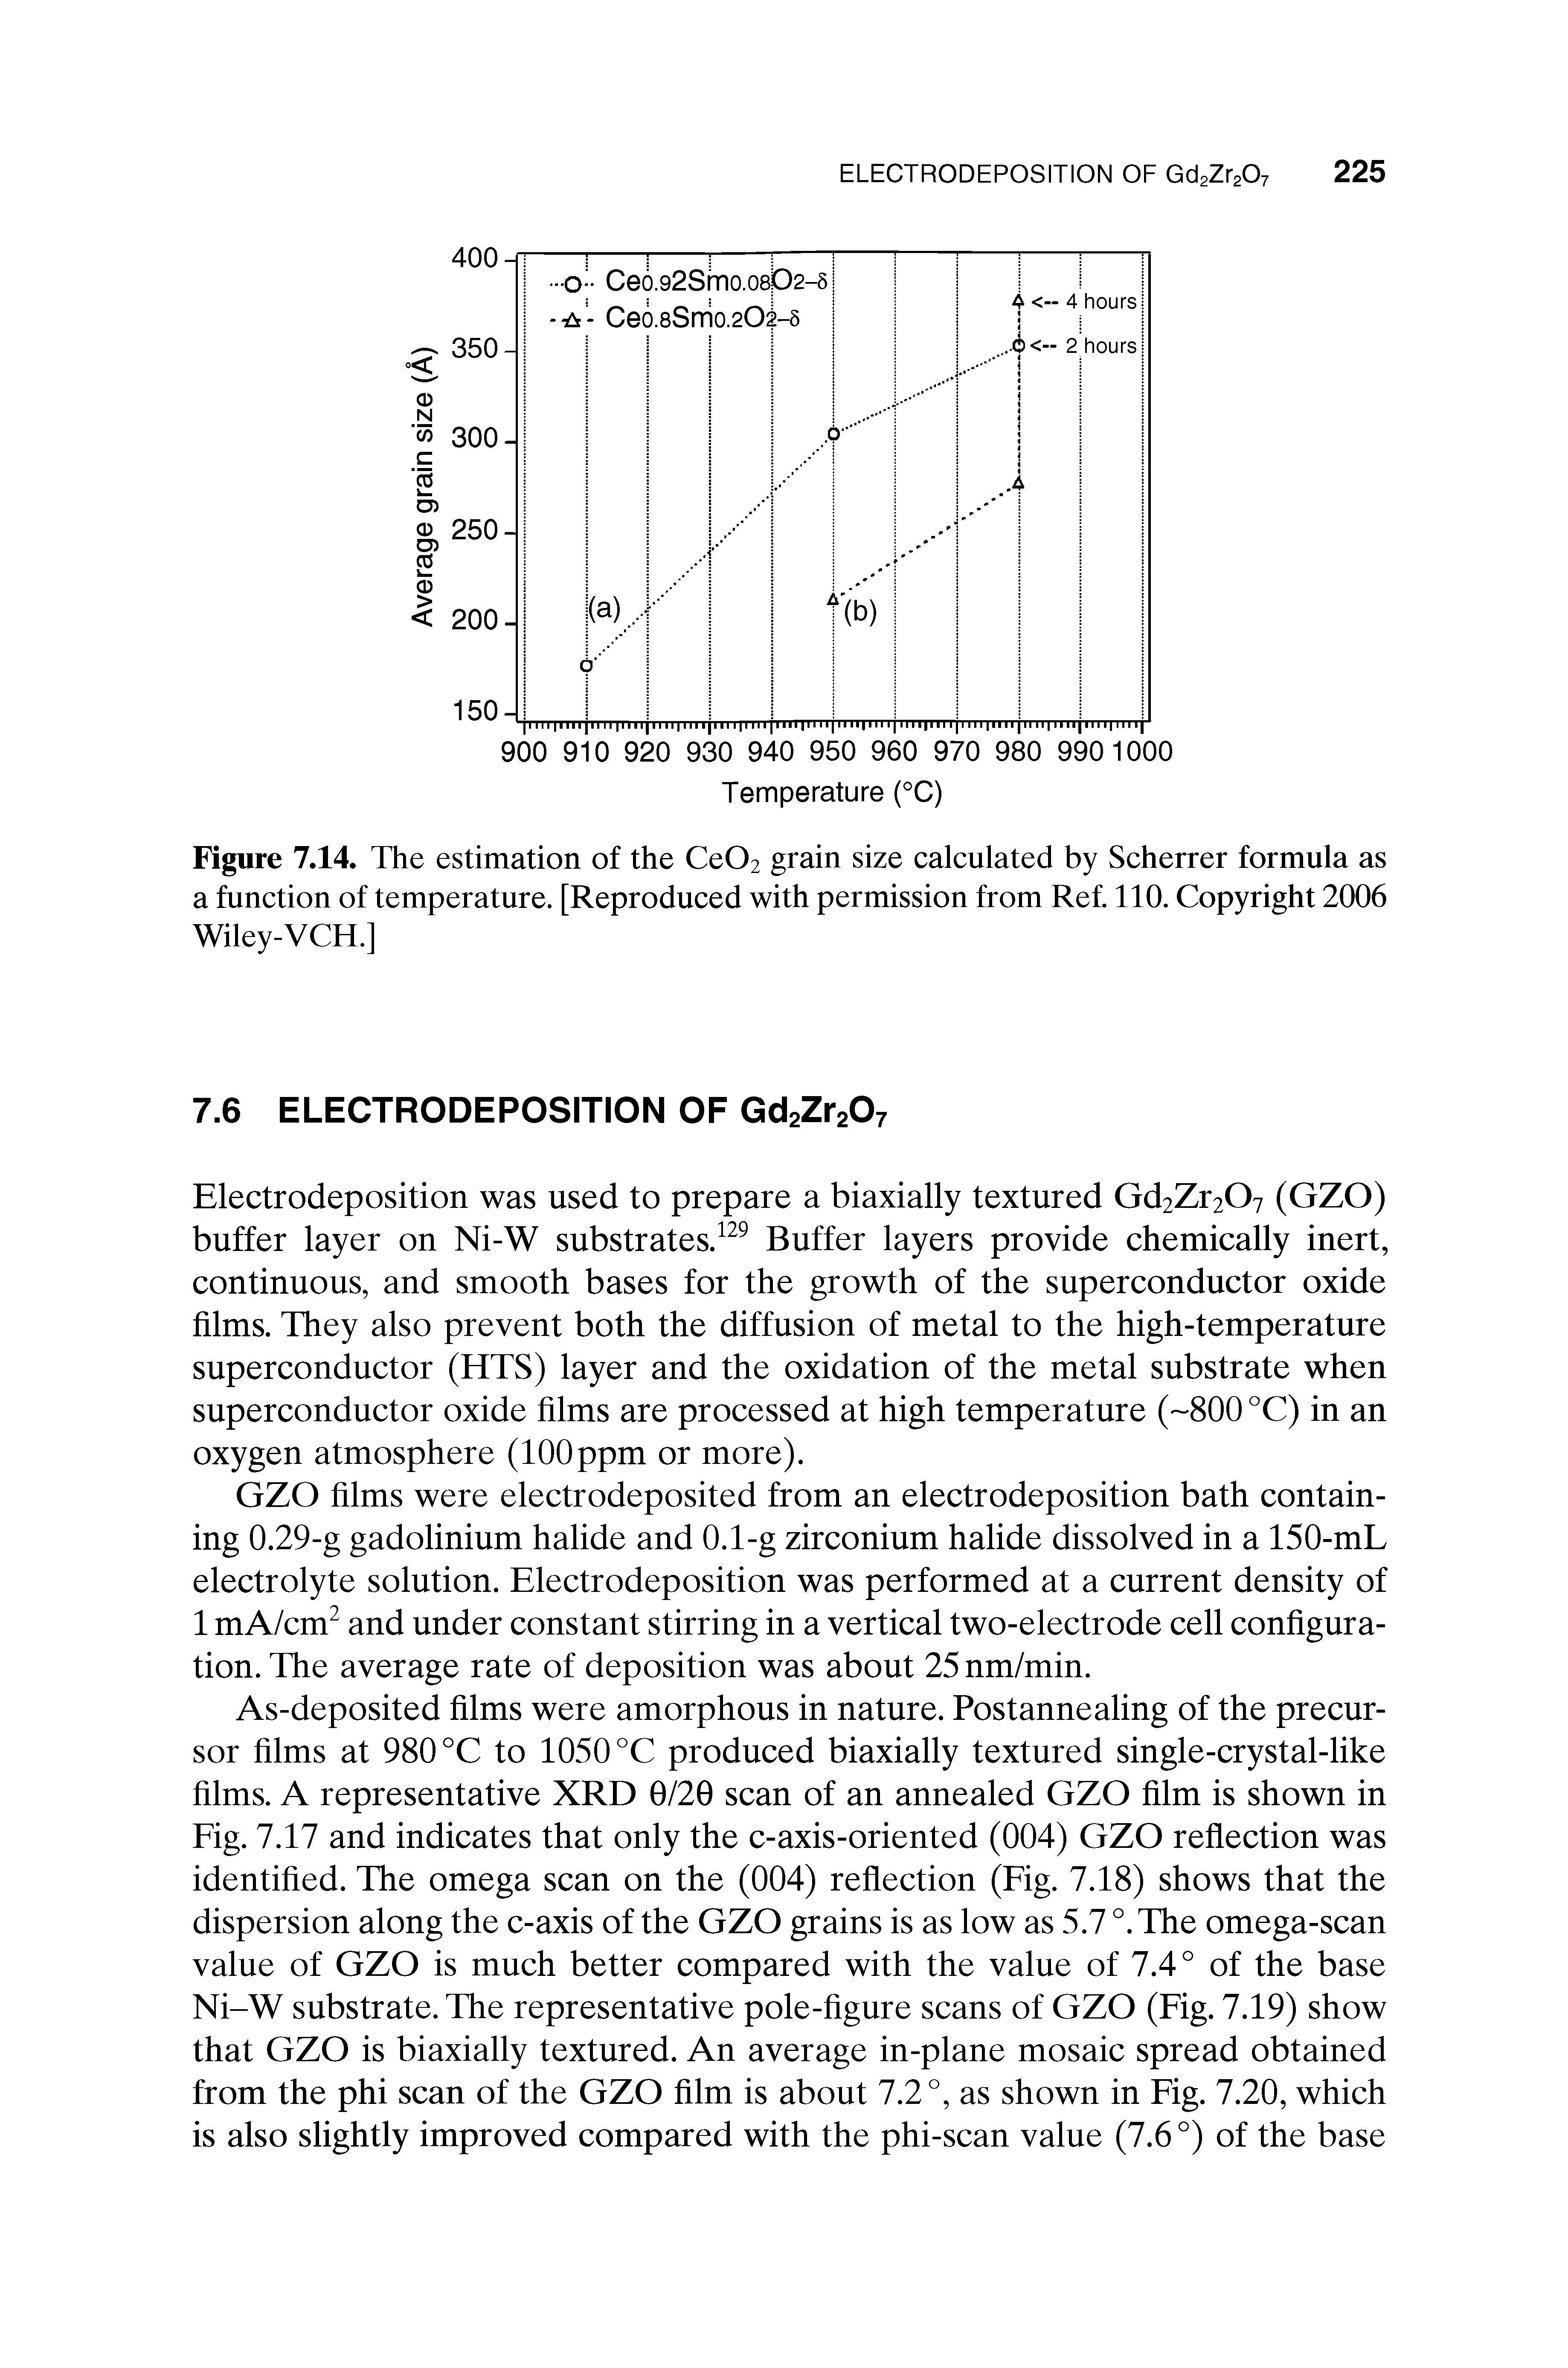 Figure 7.14. The estimation of the Ce02 grain size calculated by Scherrer formula as a function of temperature. [Reproduced with permission from Ref. 110. Copyright 2006 Wiley-VCH.]...